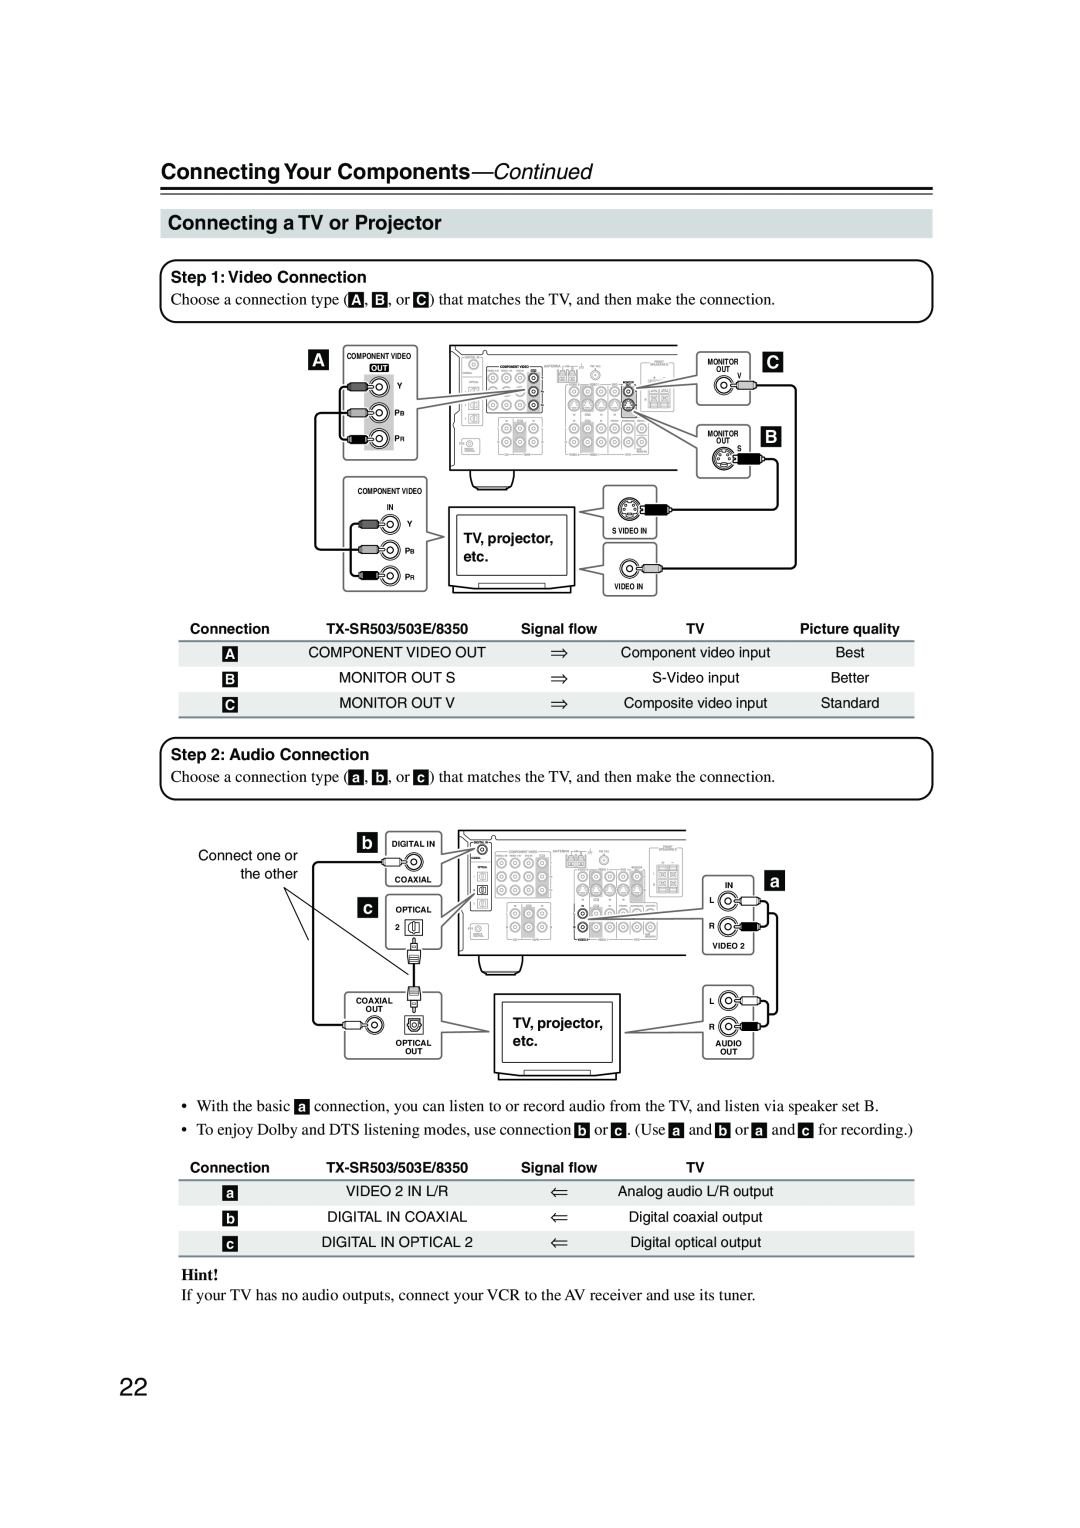 Onkyo TX-SR8350, TX-SR503E instruction manual Connecting a TV or Projector, Connecting Your Components-Continued, Hint 